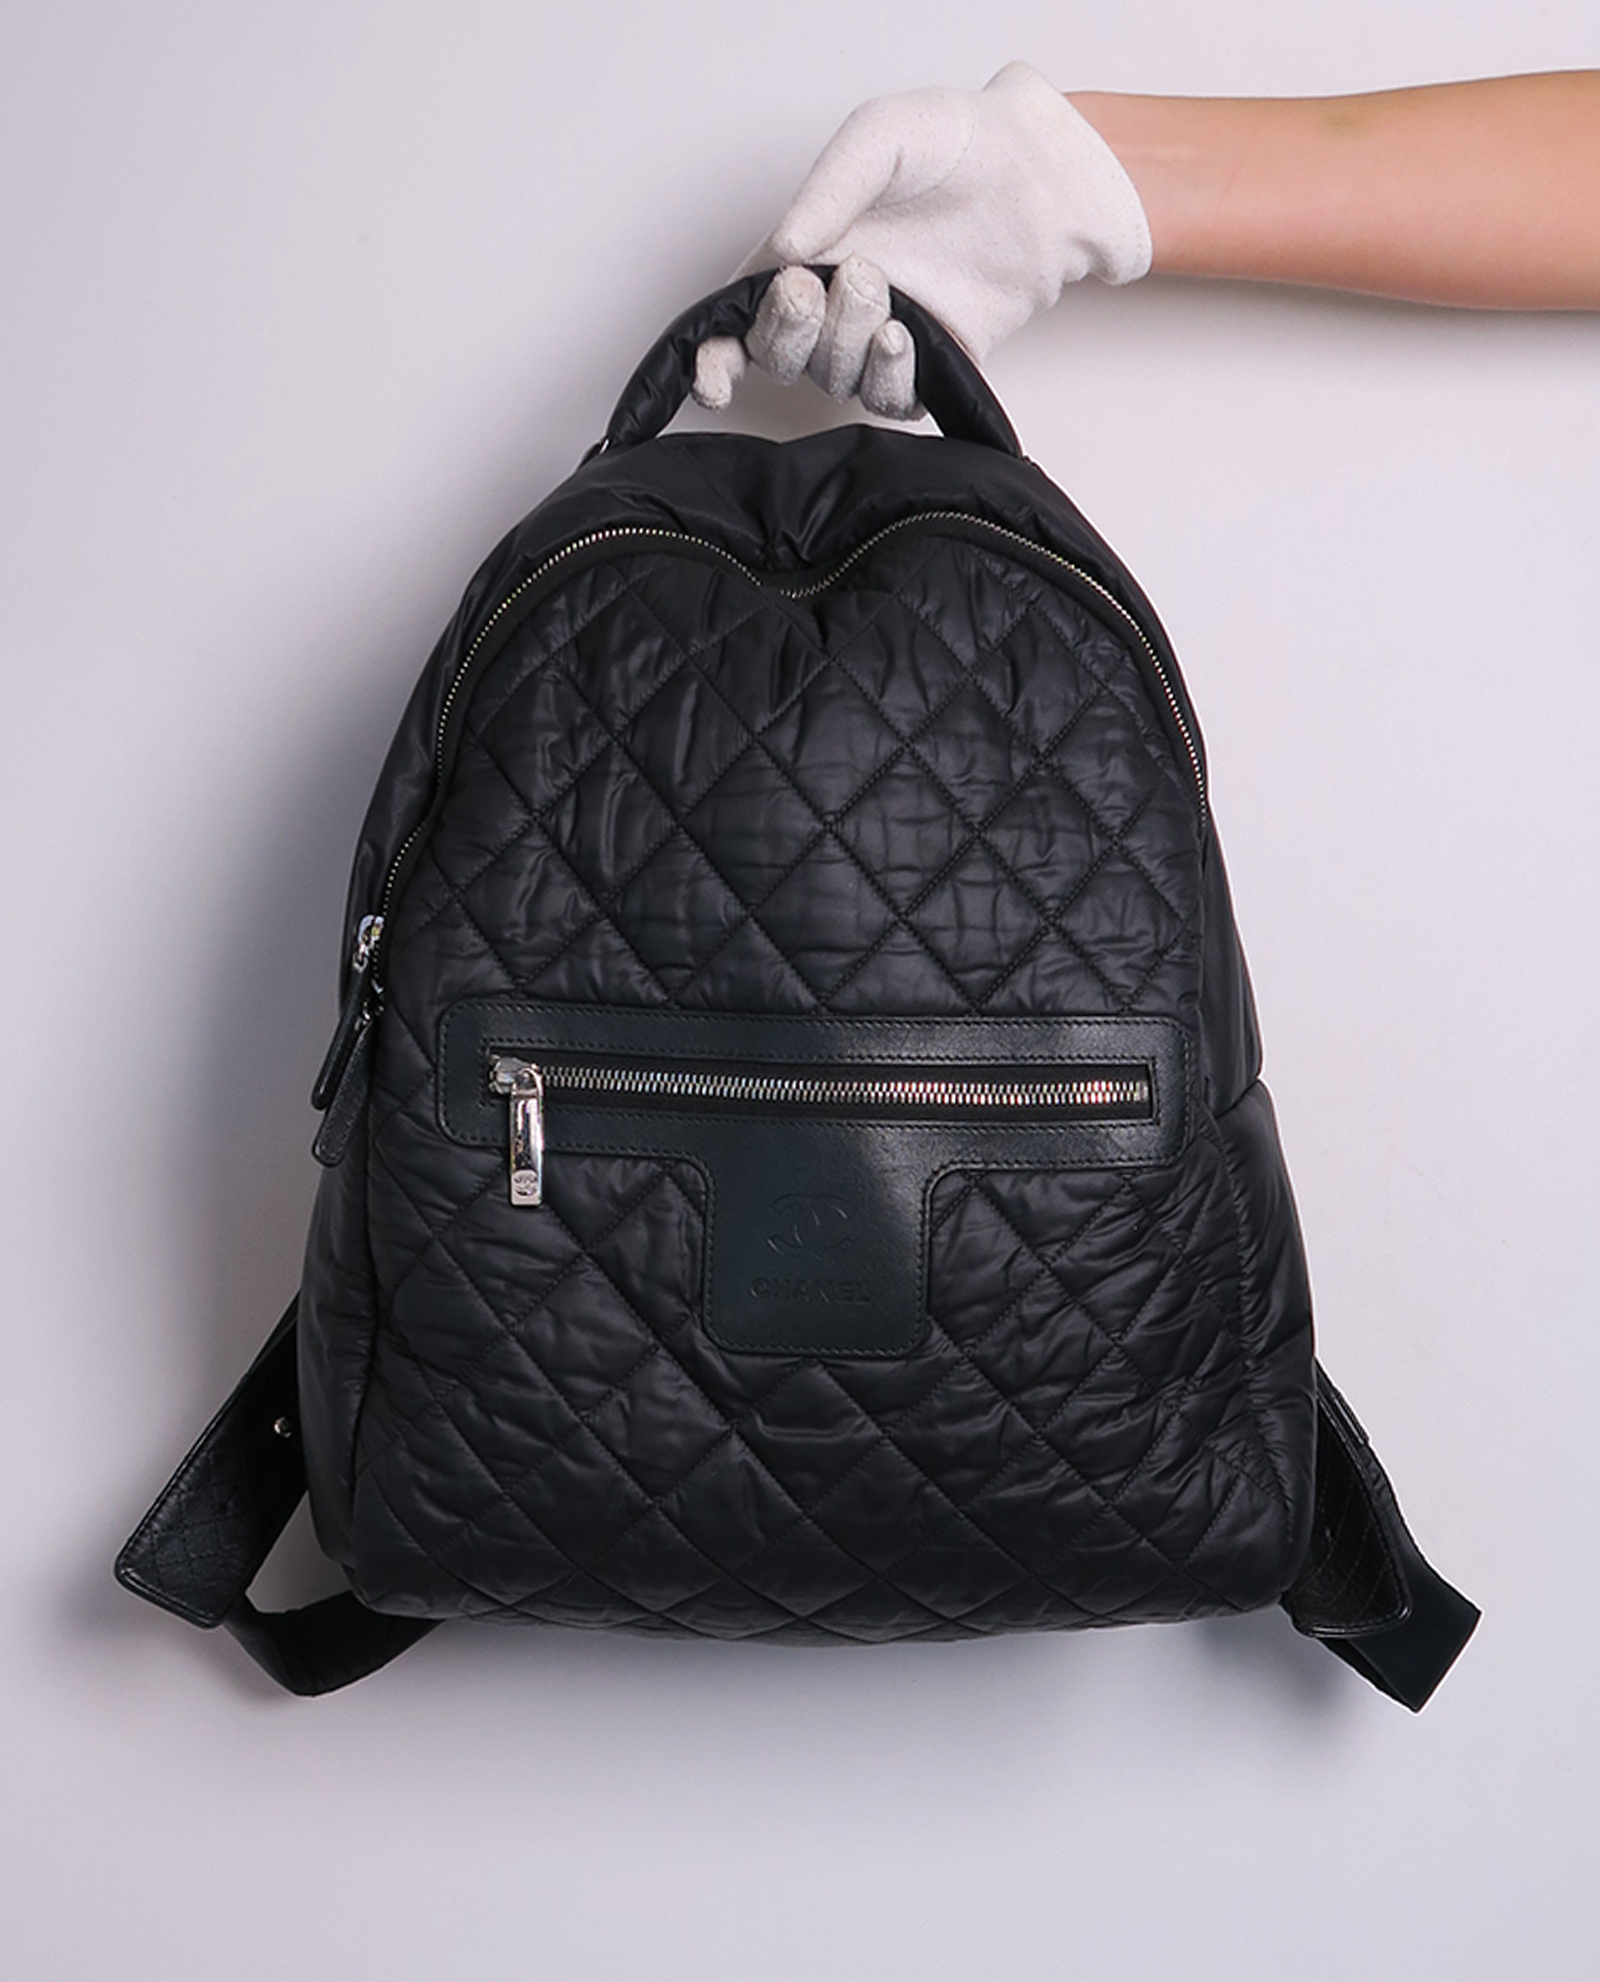 Green Chanel palace Coco Cocoon Travel Bag